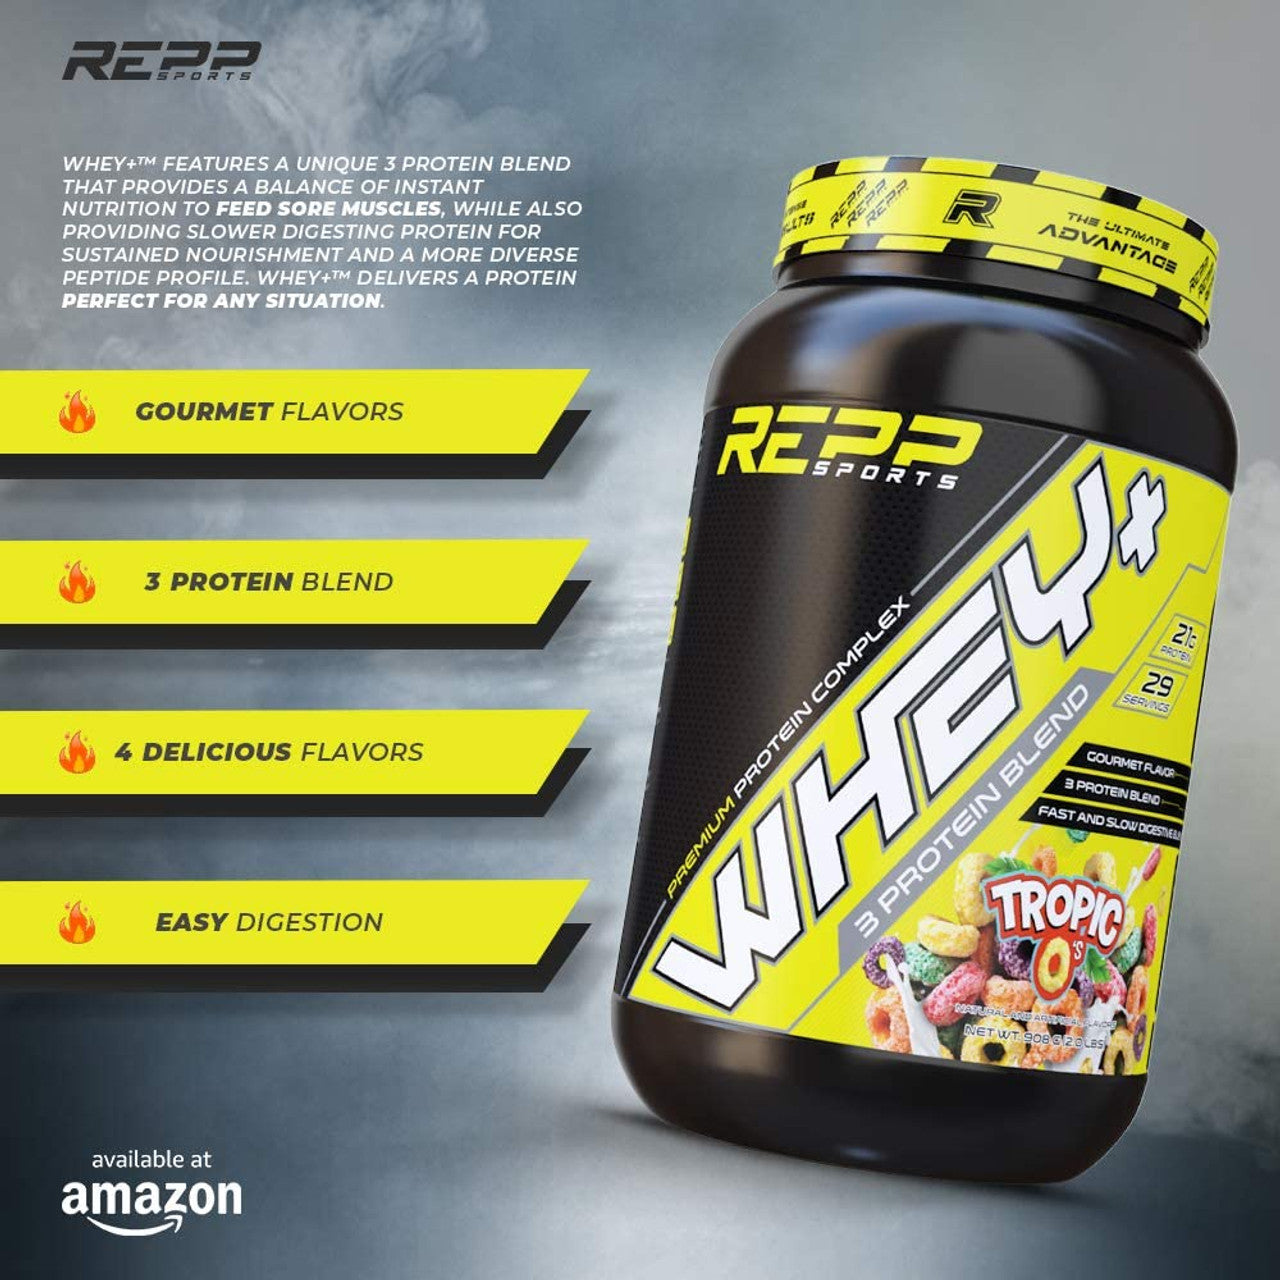 Repp Sports Whey+ - A1 Supplements Store